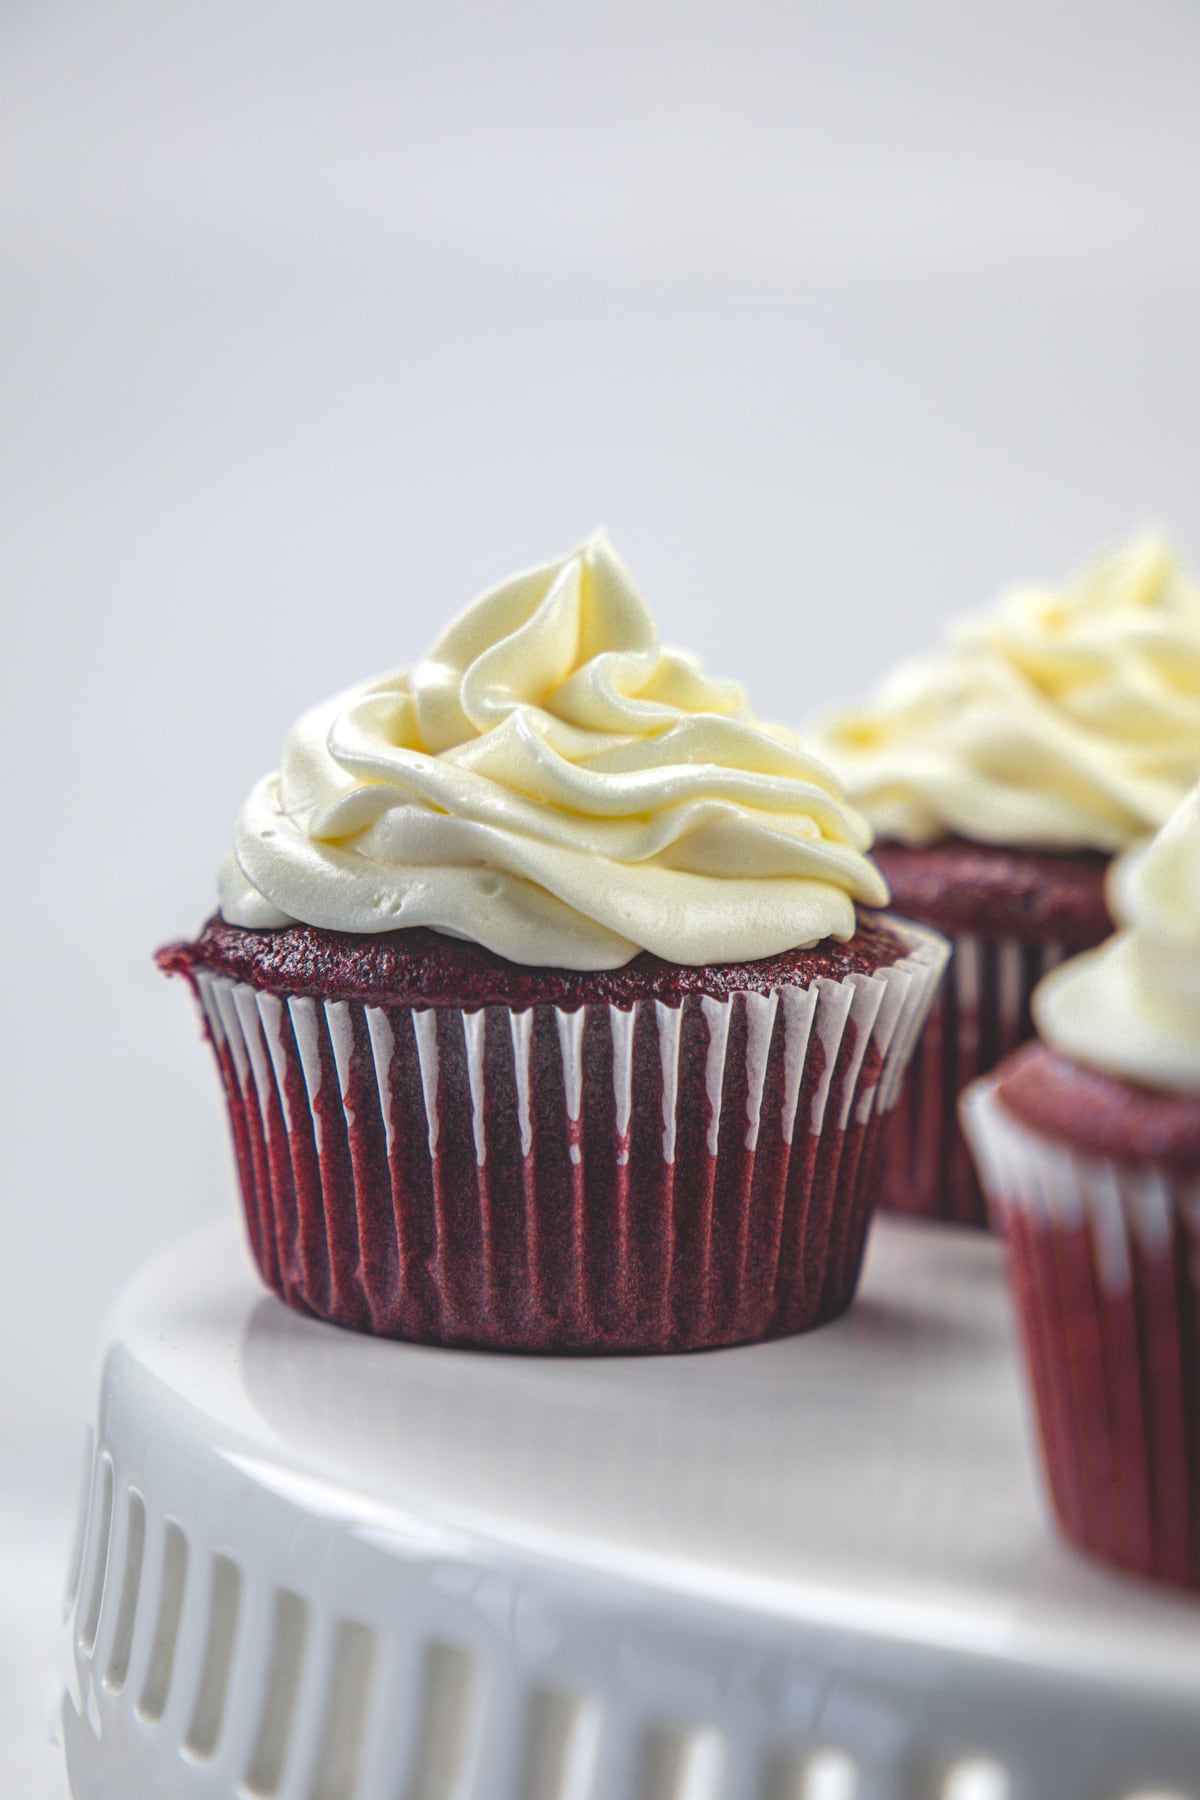 Eggless red velvet cupcake frosted with whipped cream cheese frosting.